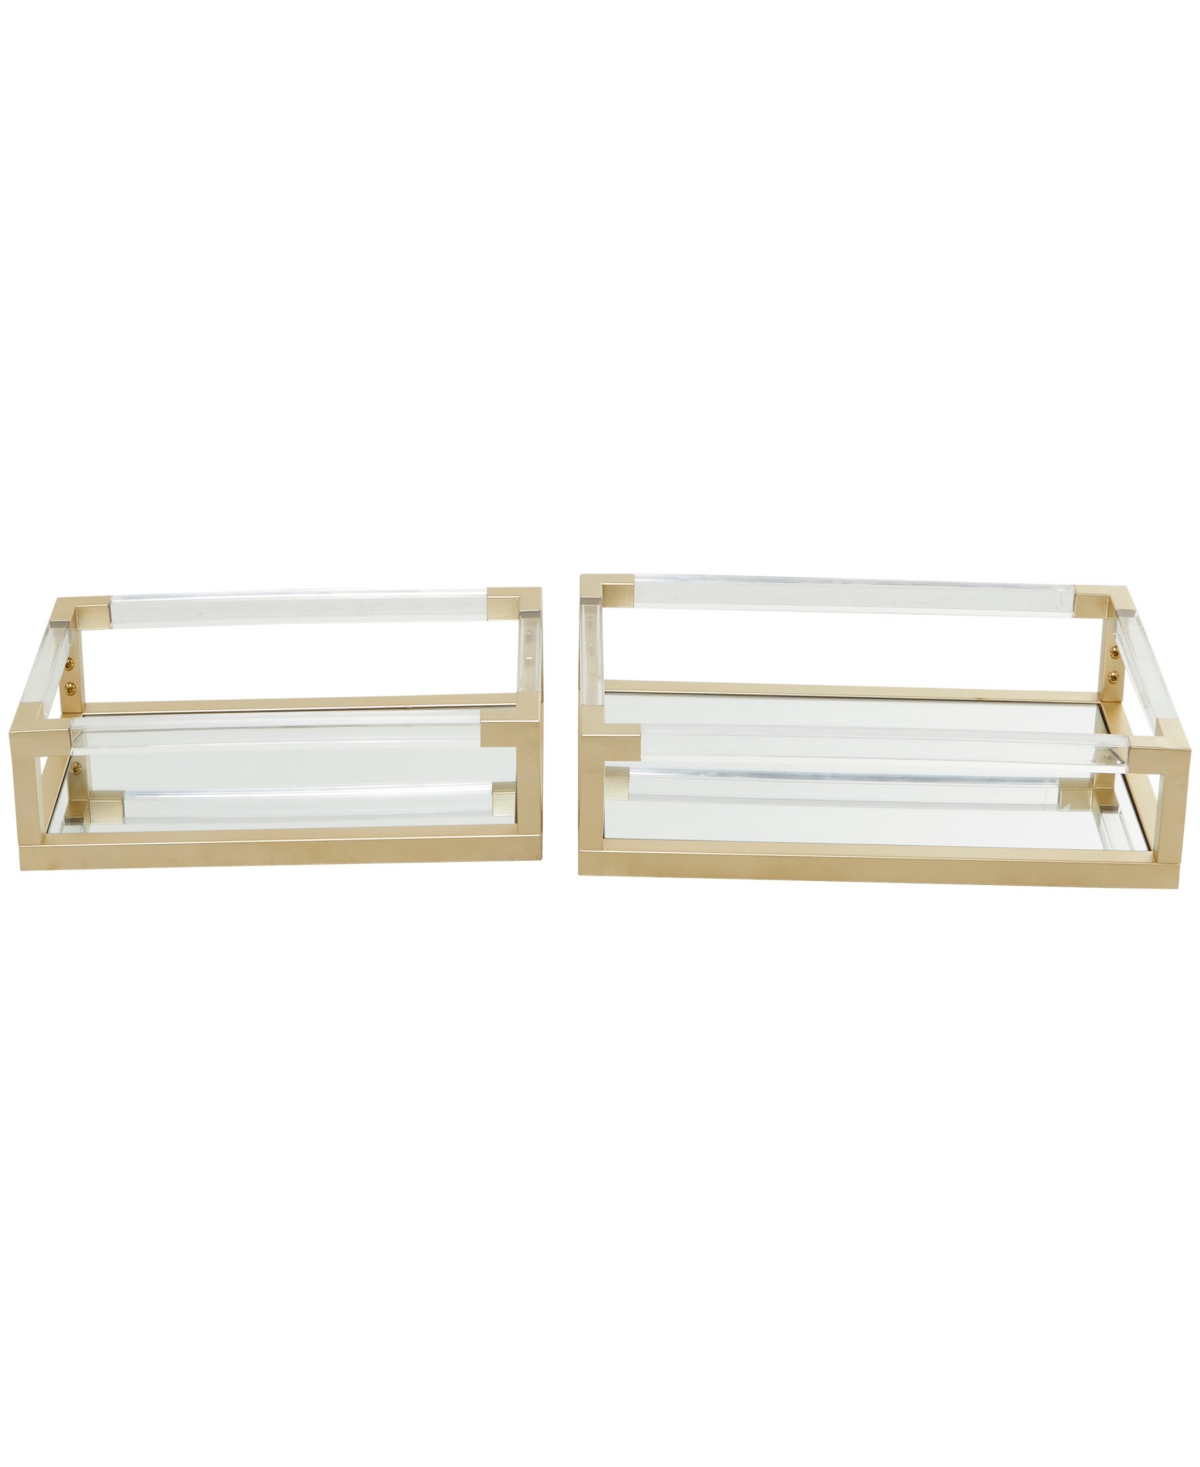 Cosmoliving By Cosmopolitan Metal Mirrored Tray With Acrylic Handles, Set Of 2, 20", 18" W In Gold